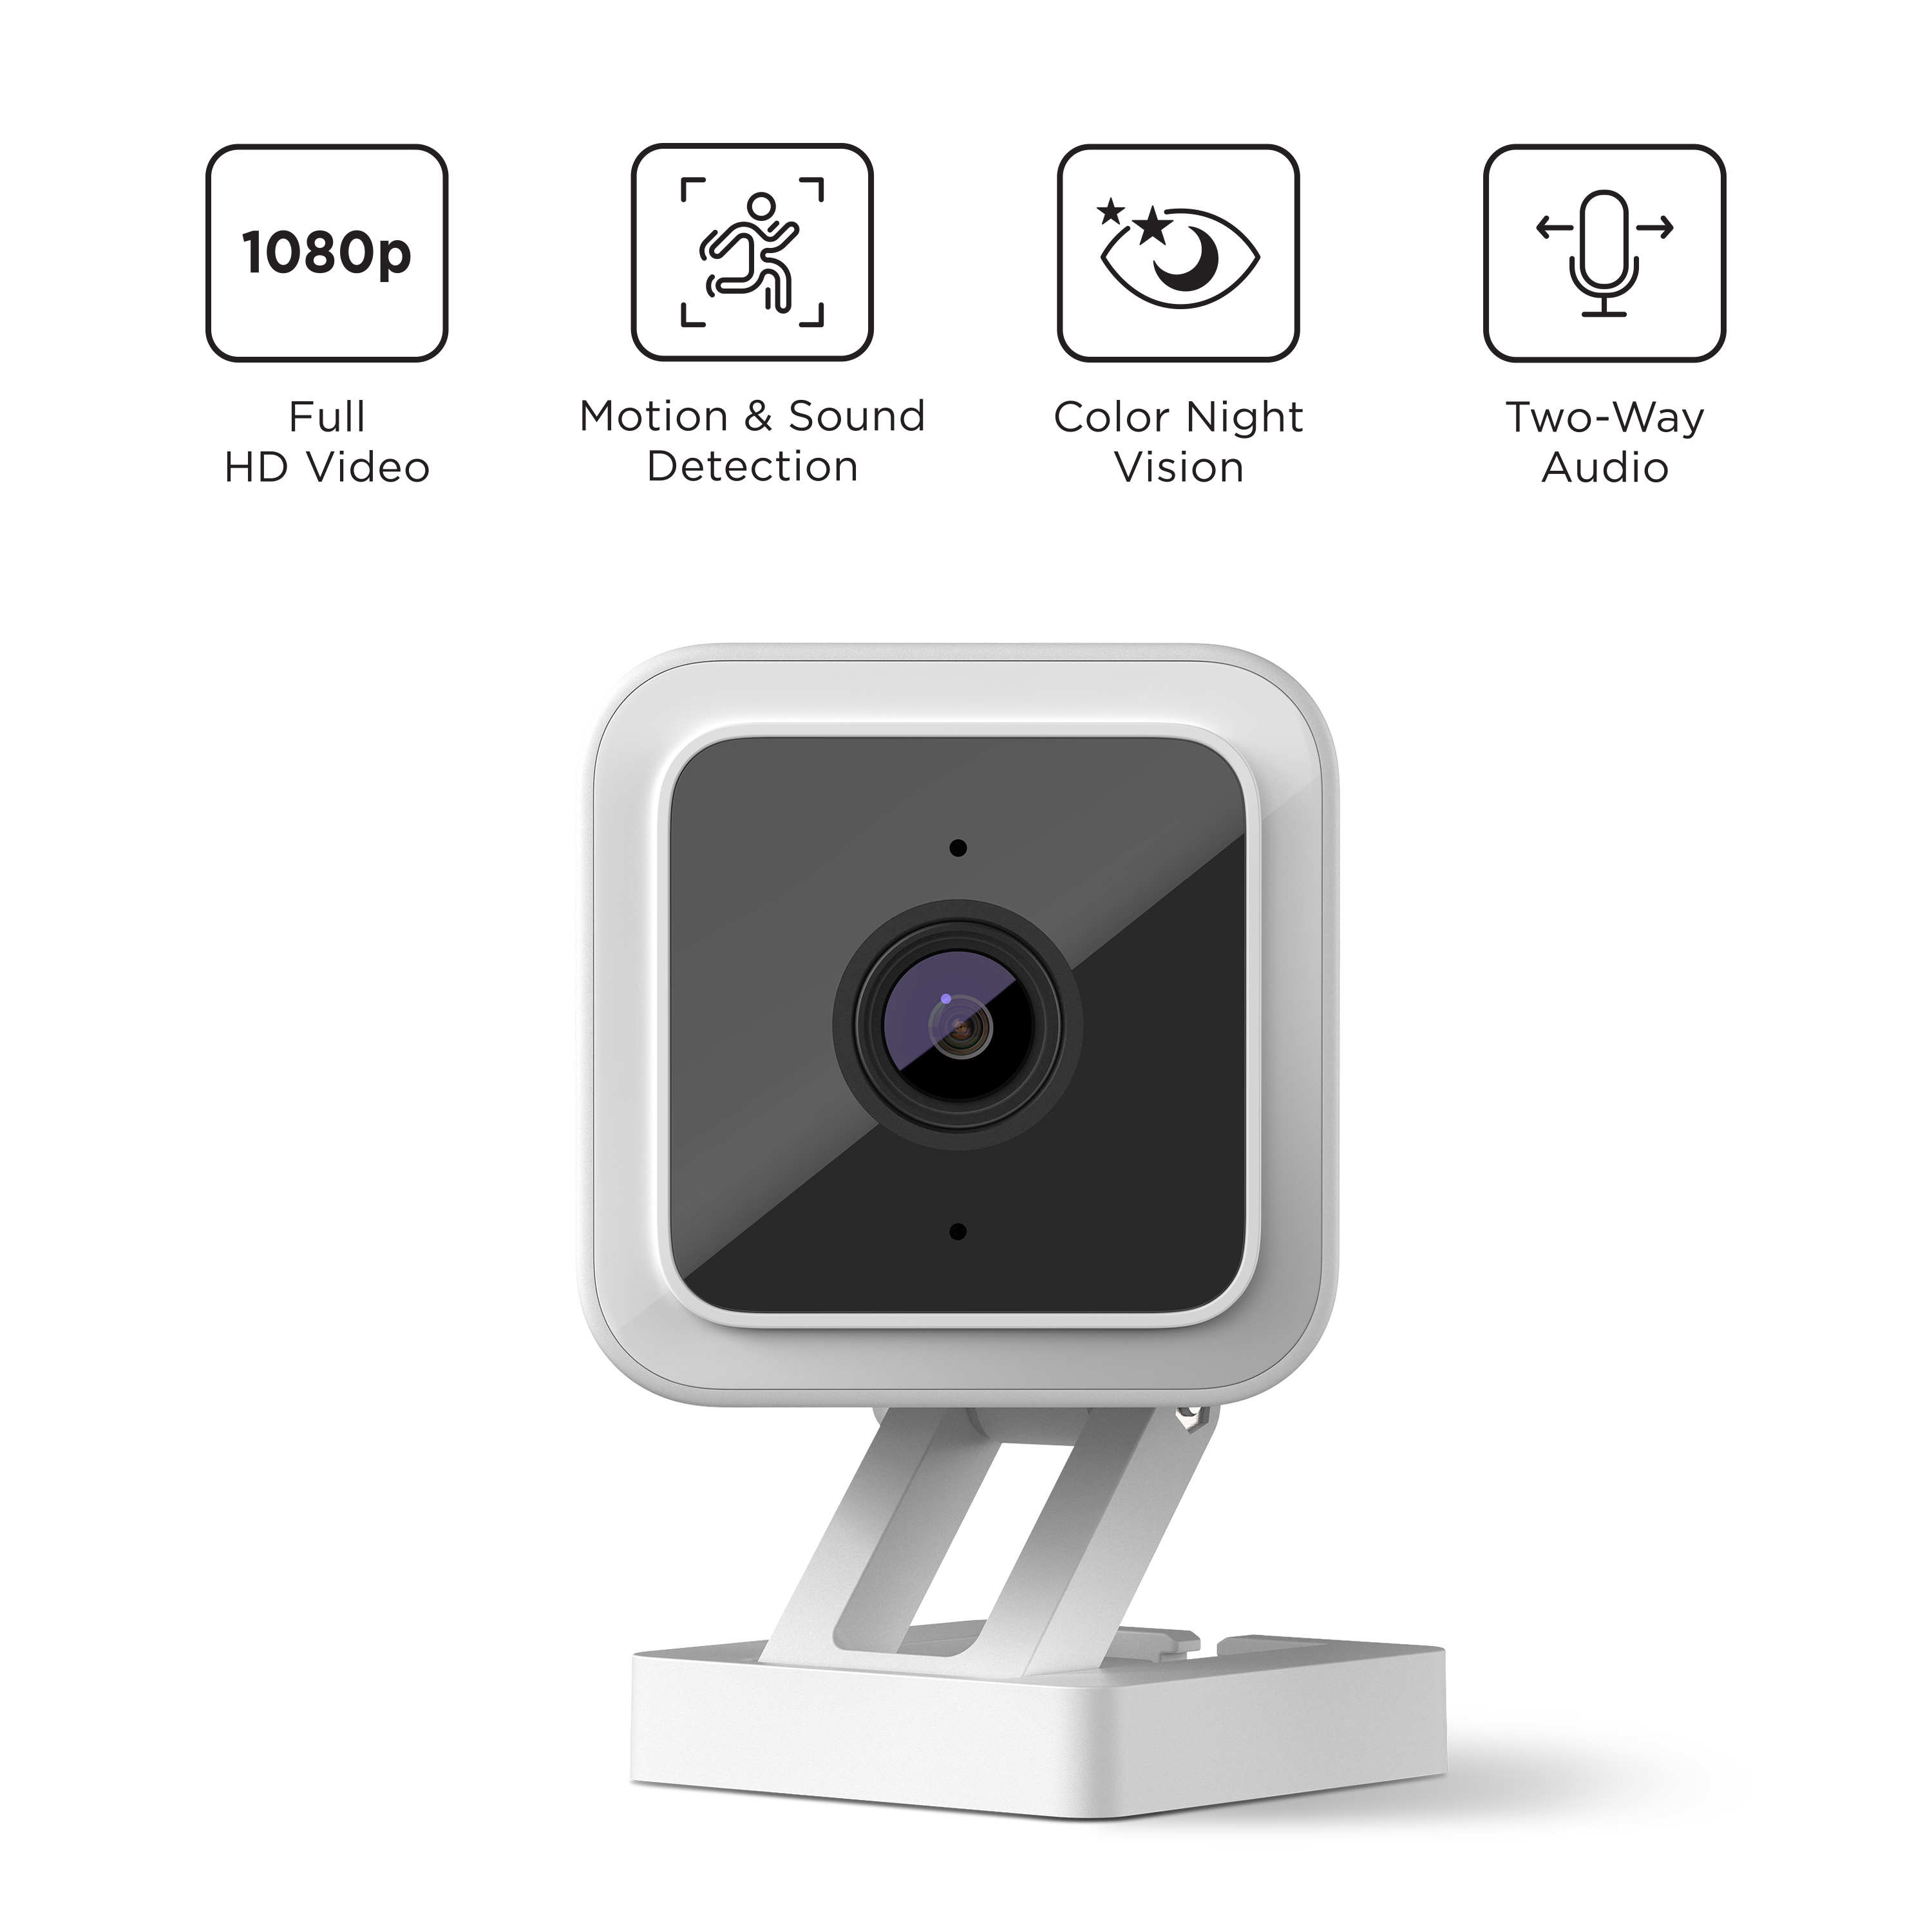 Roku Smart Home Indoor Camera SE Wi-Fi - Wired Security Camera; Motion & Sound Detection - image 3 of 9